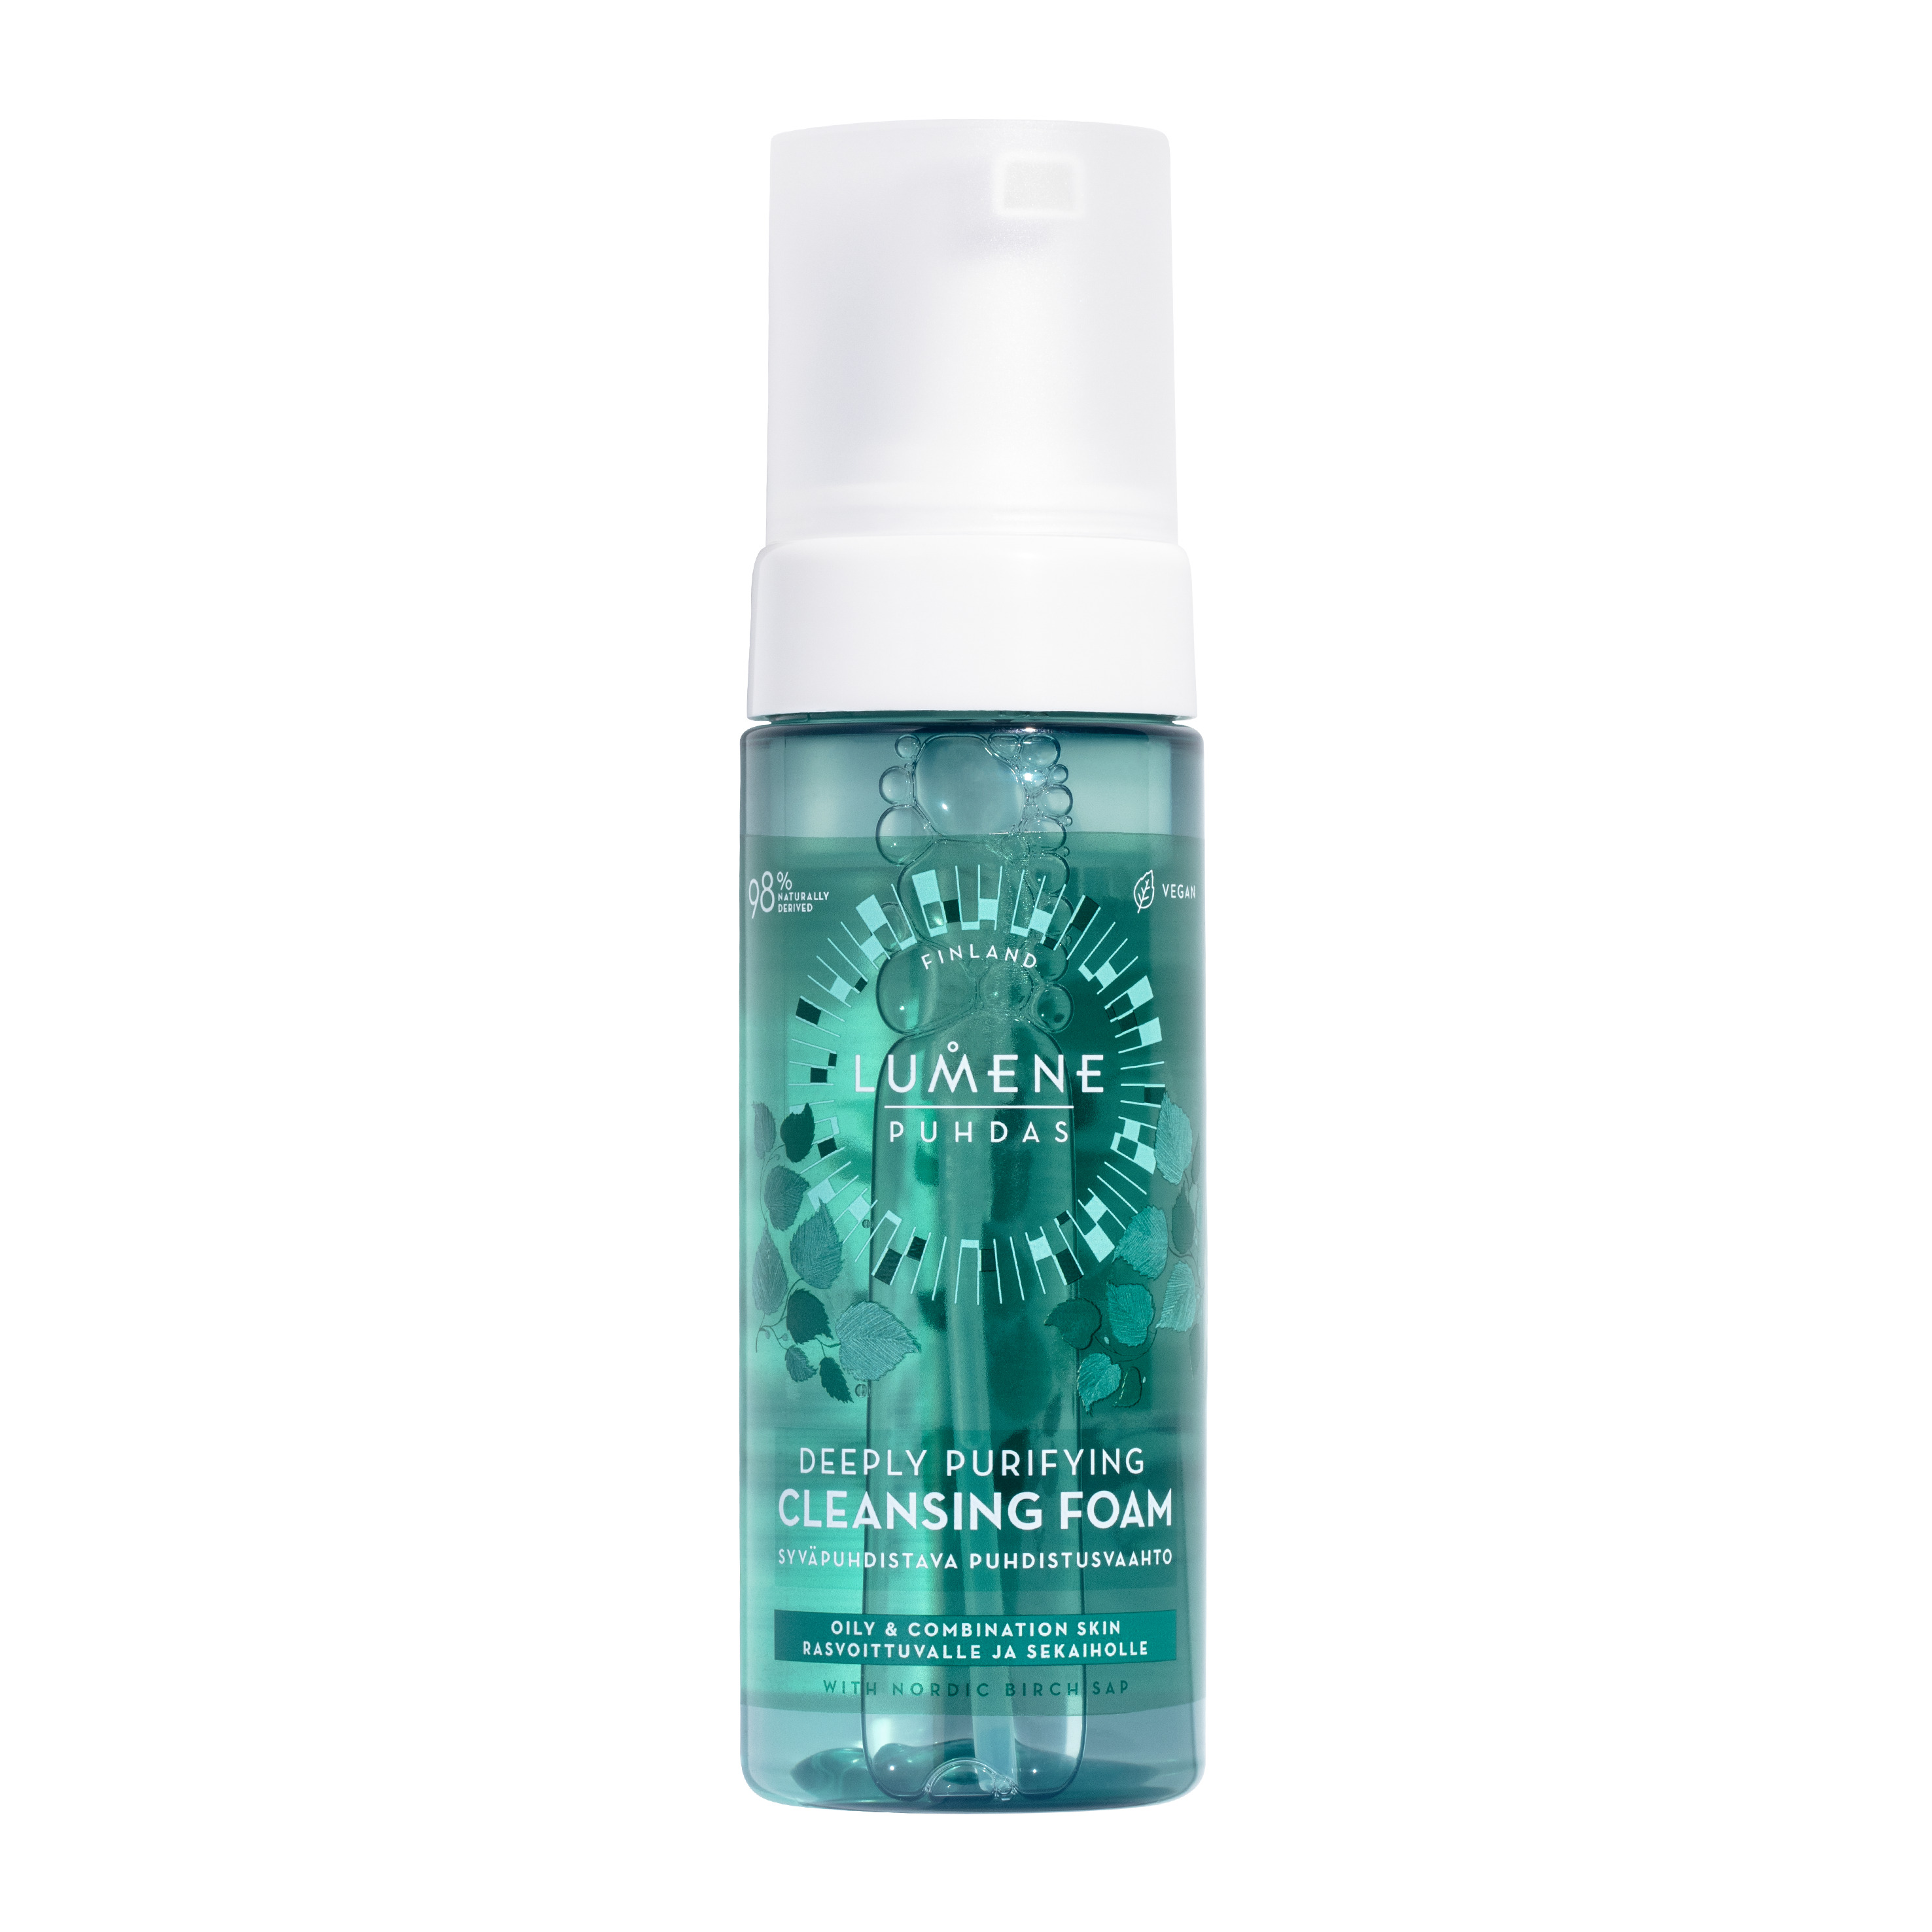 PUHDAS Deeply Purifying Cleansing Foam